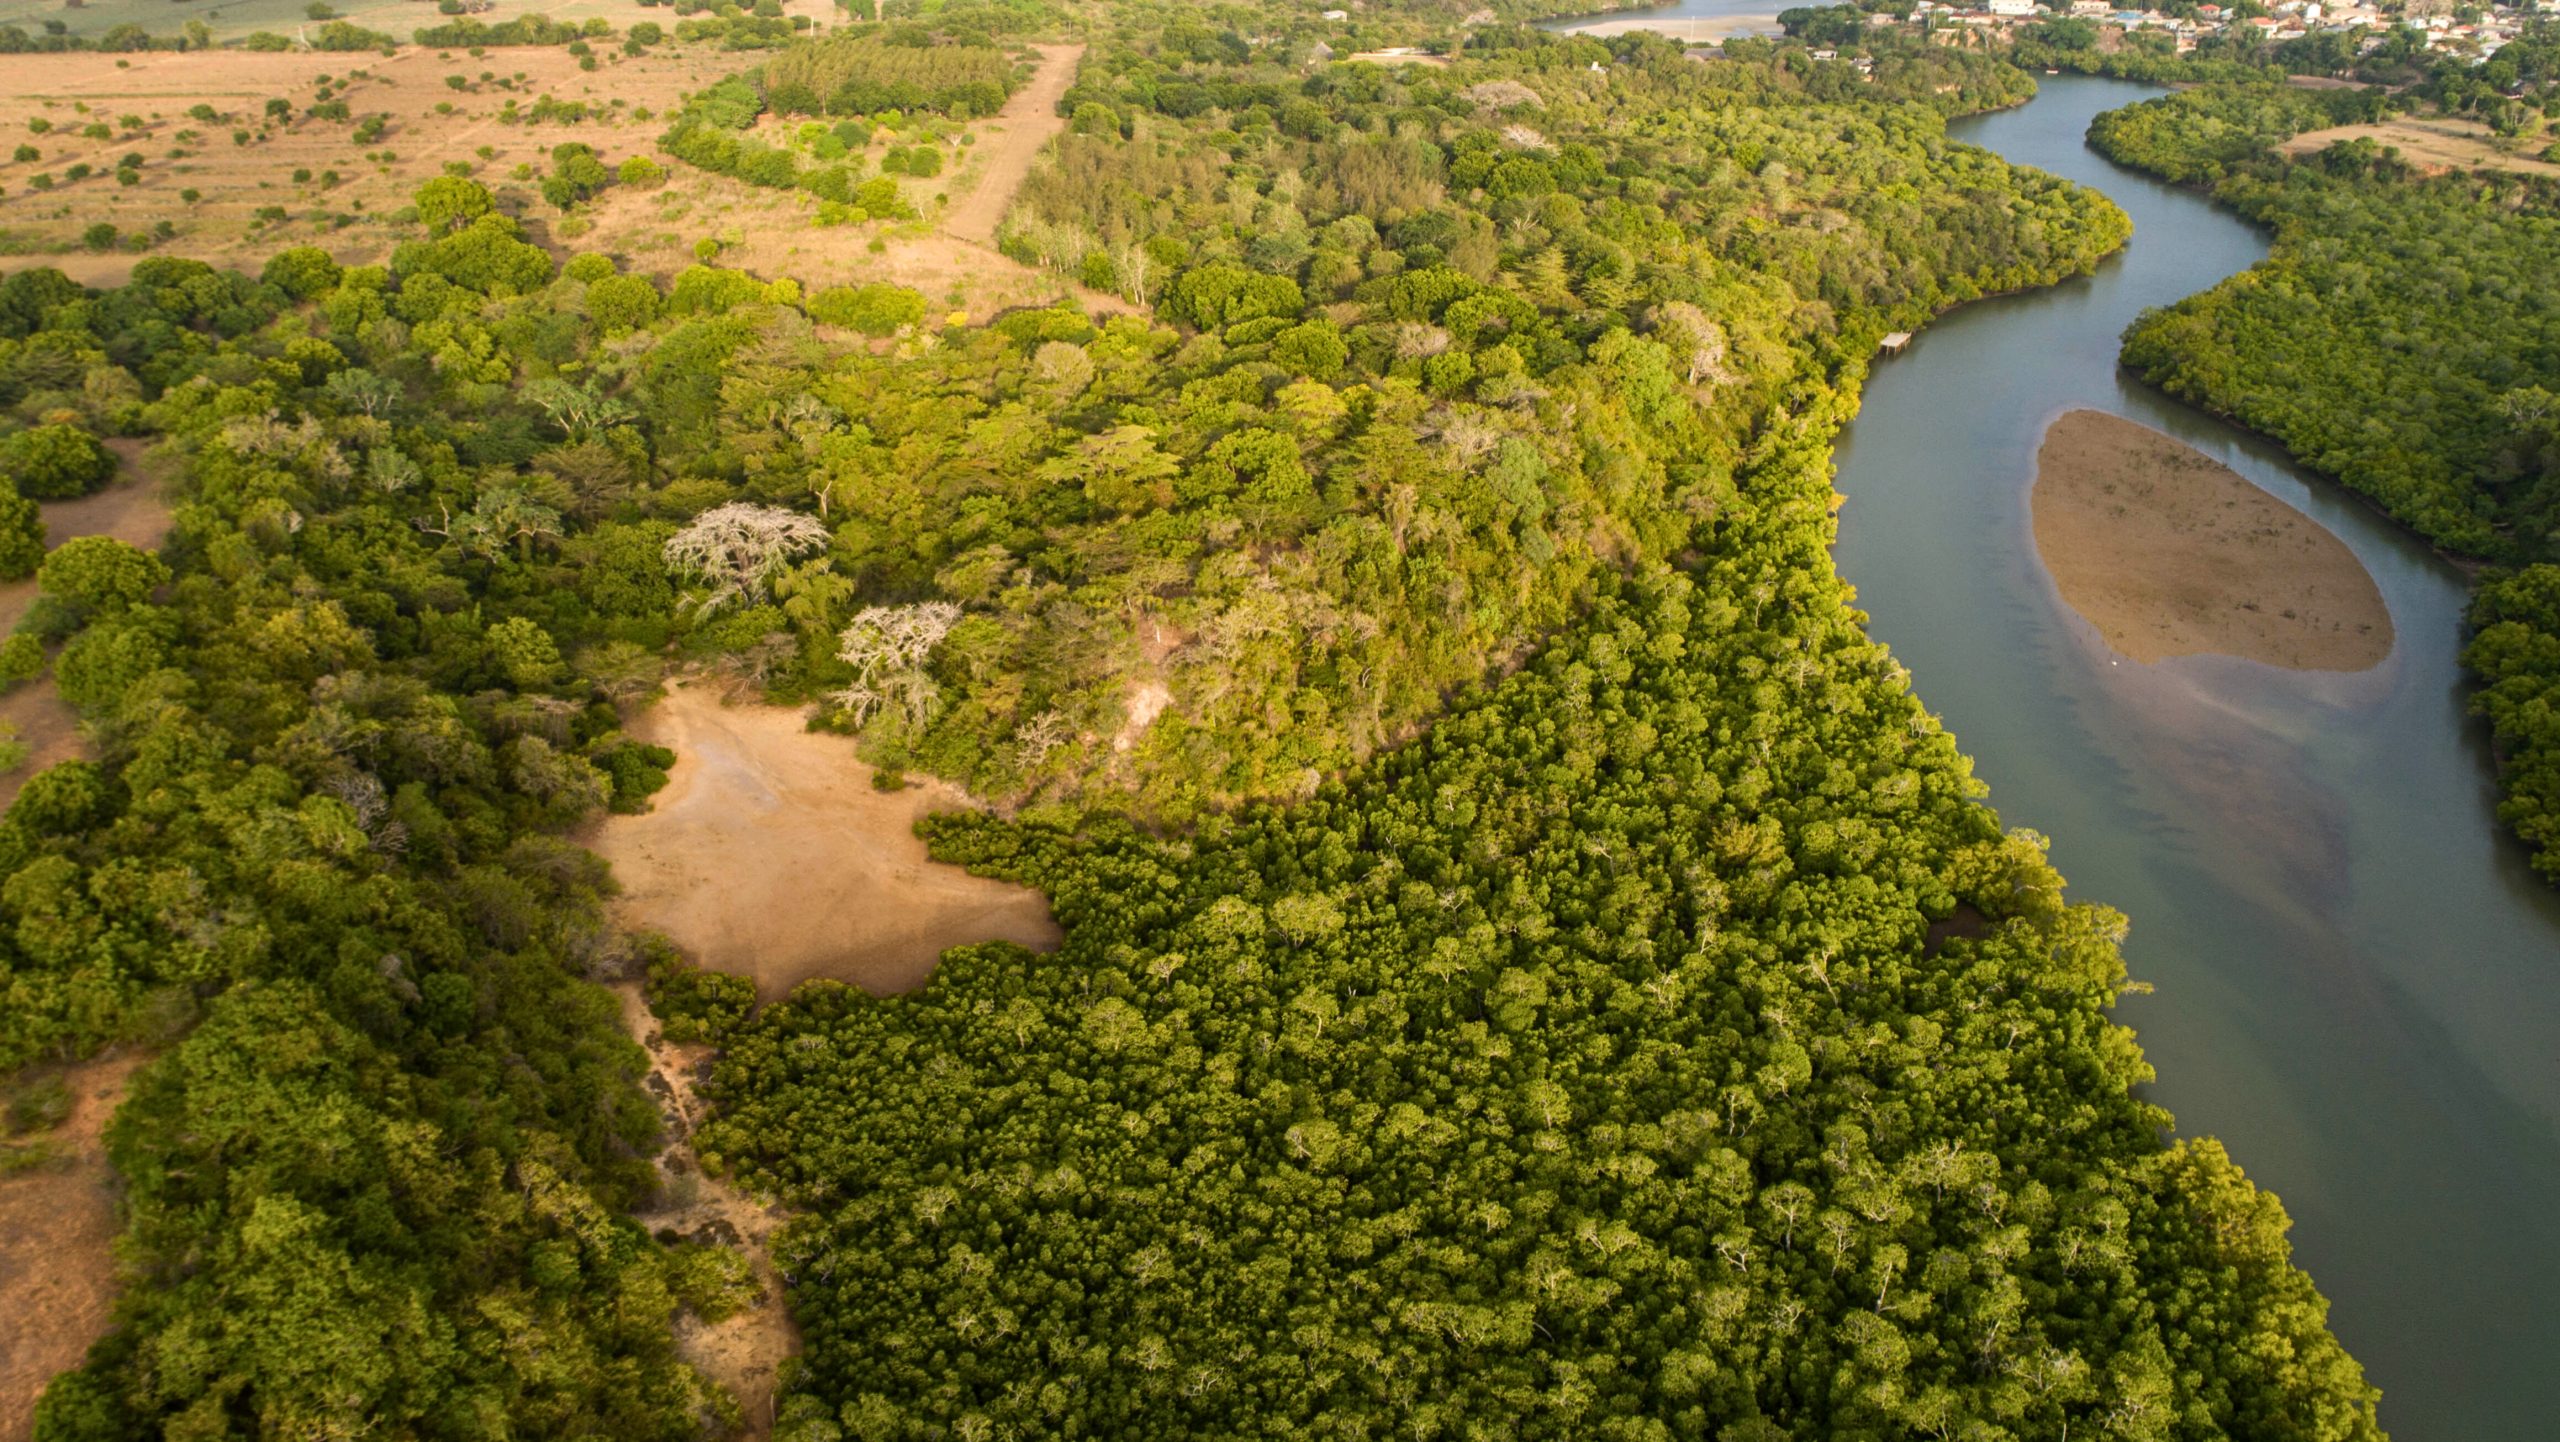 Embrace Sustainable Living with Plots and Homes for Sale in Kilifi’s Green Heart of Kenya